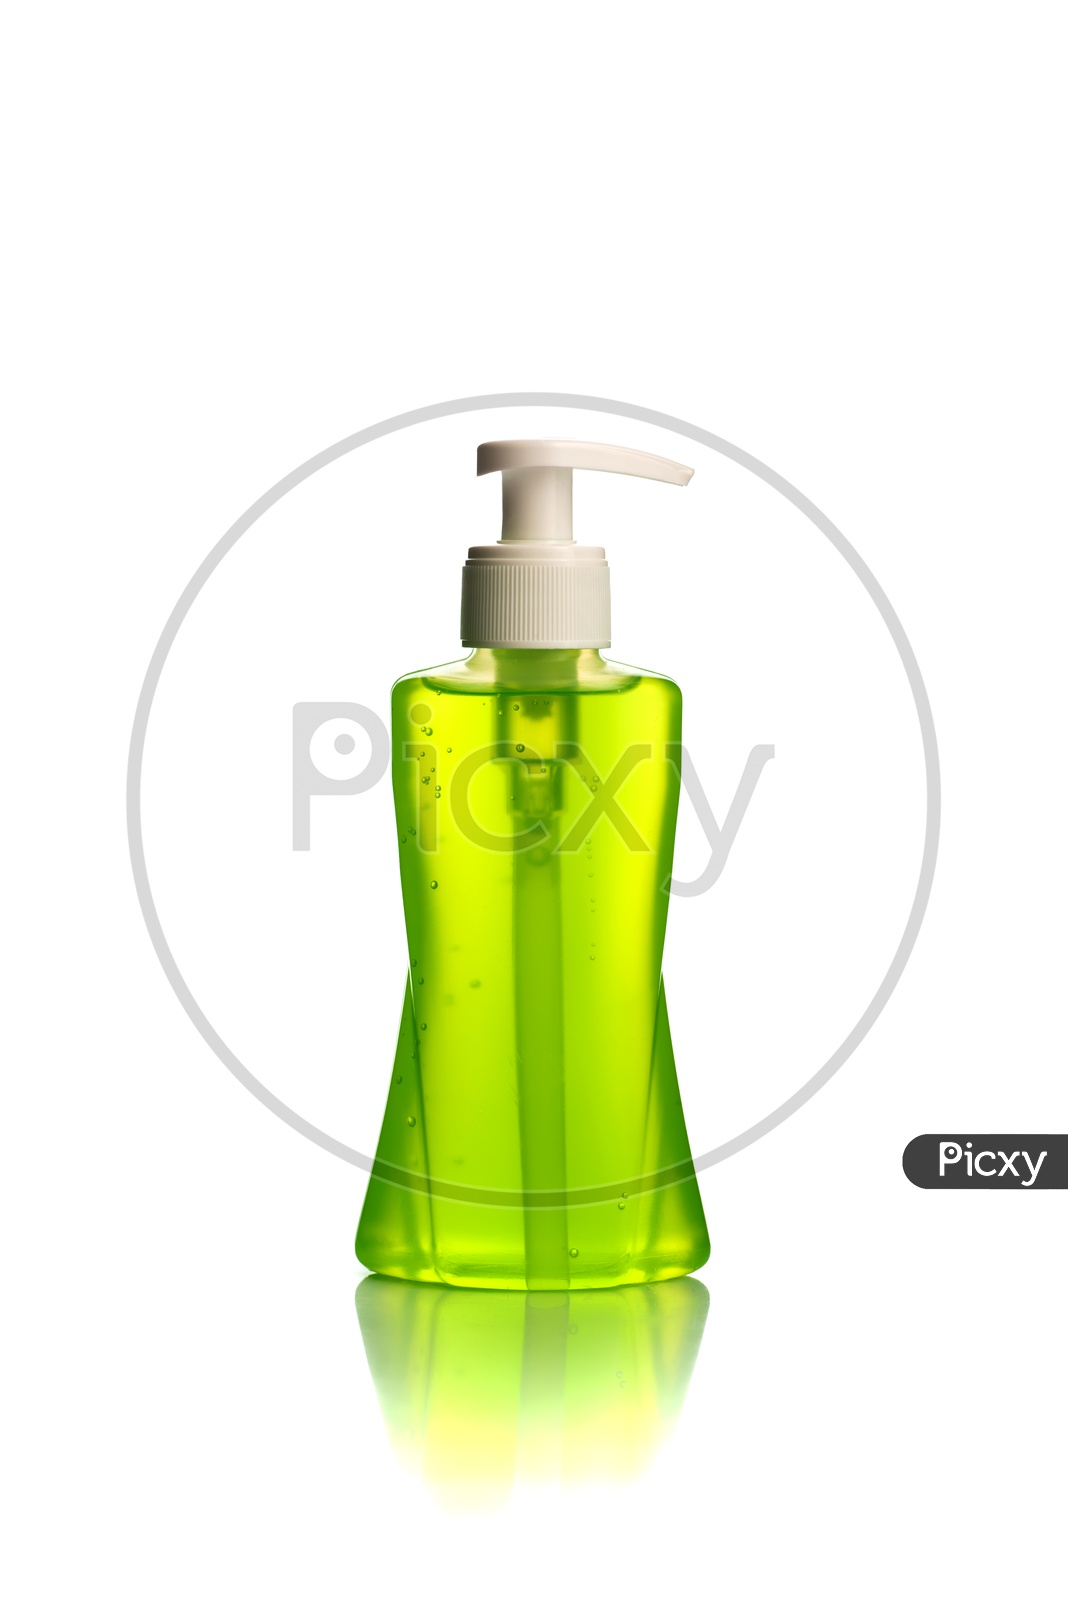 A Bottle Of Liquid Soap Or Face wash Or Face Cream Dispenser Filled With Aloe Vera  Gel  on an Isolated White Background